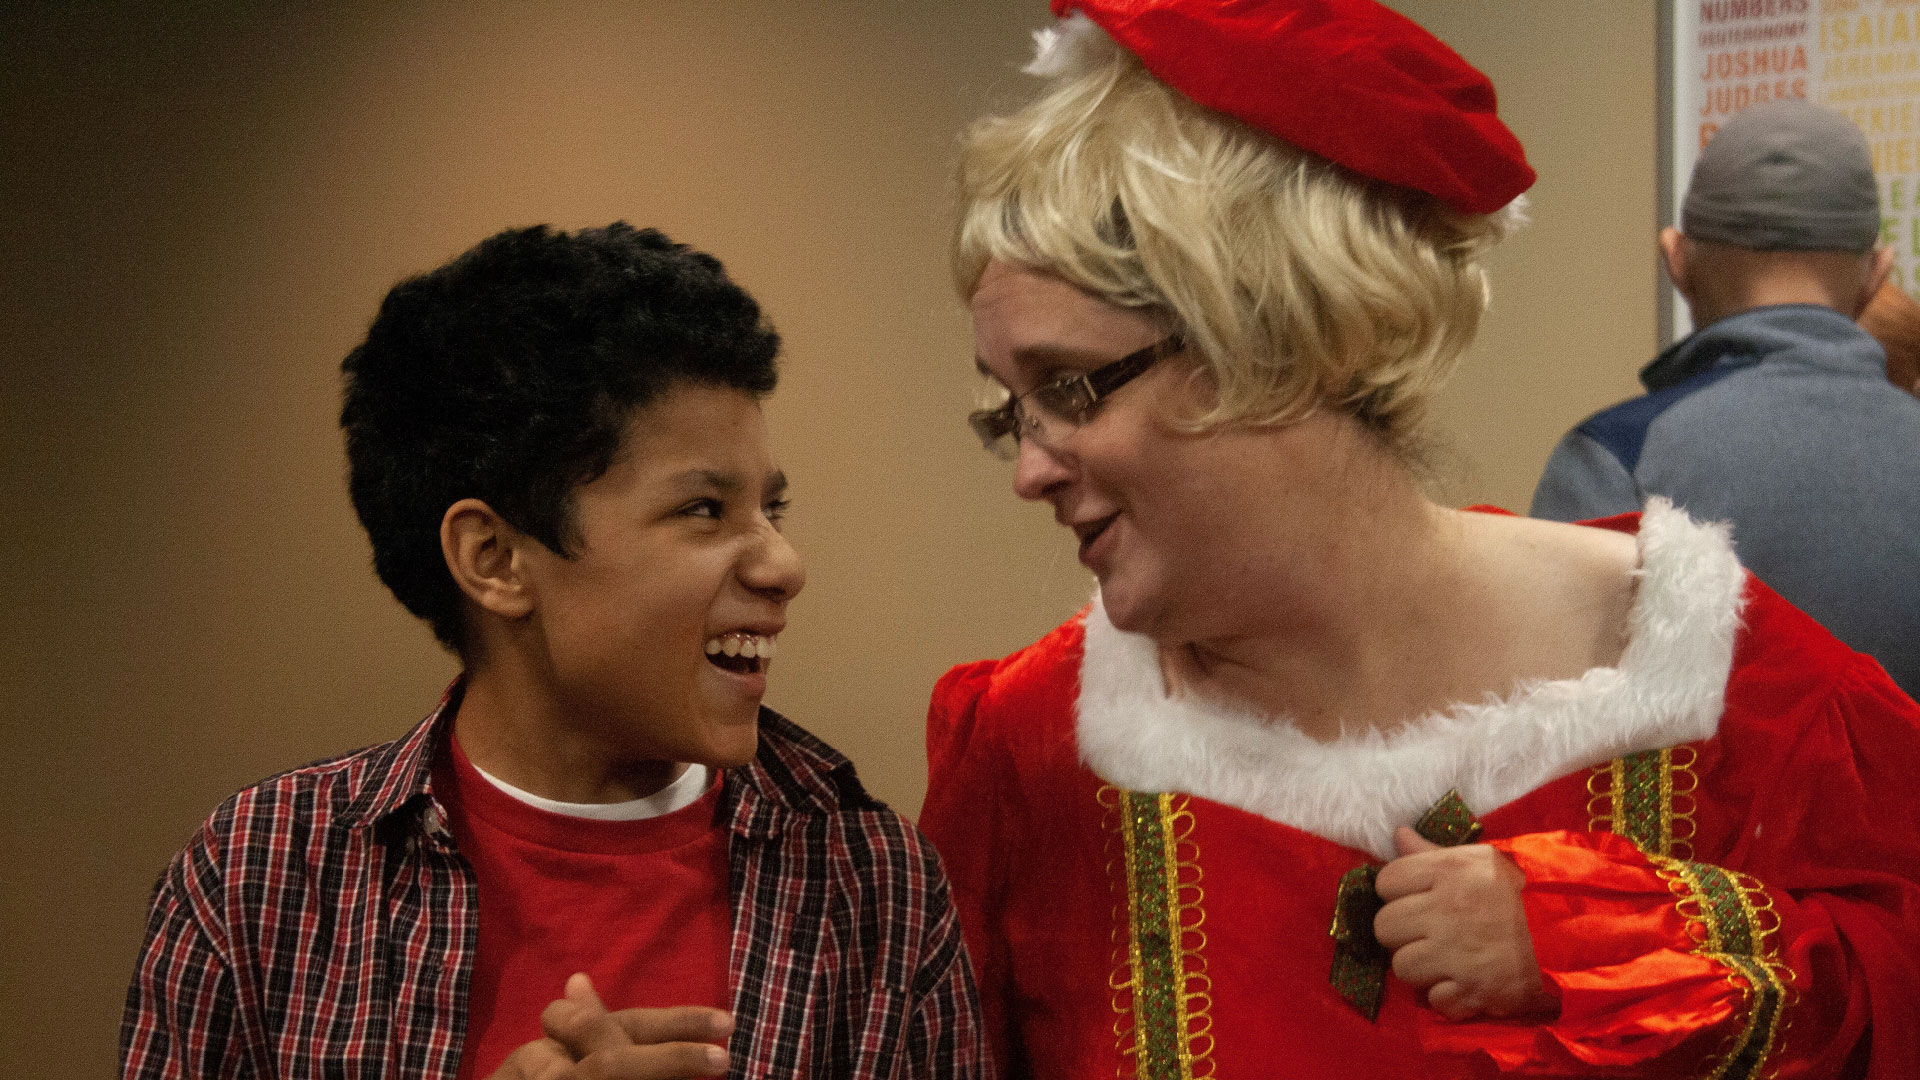 A volunteer dressed up at a Special Friends event at Brookwood Church interacts with a smiling Special Friend.